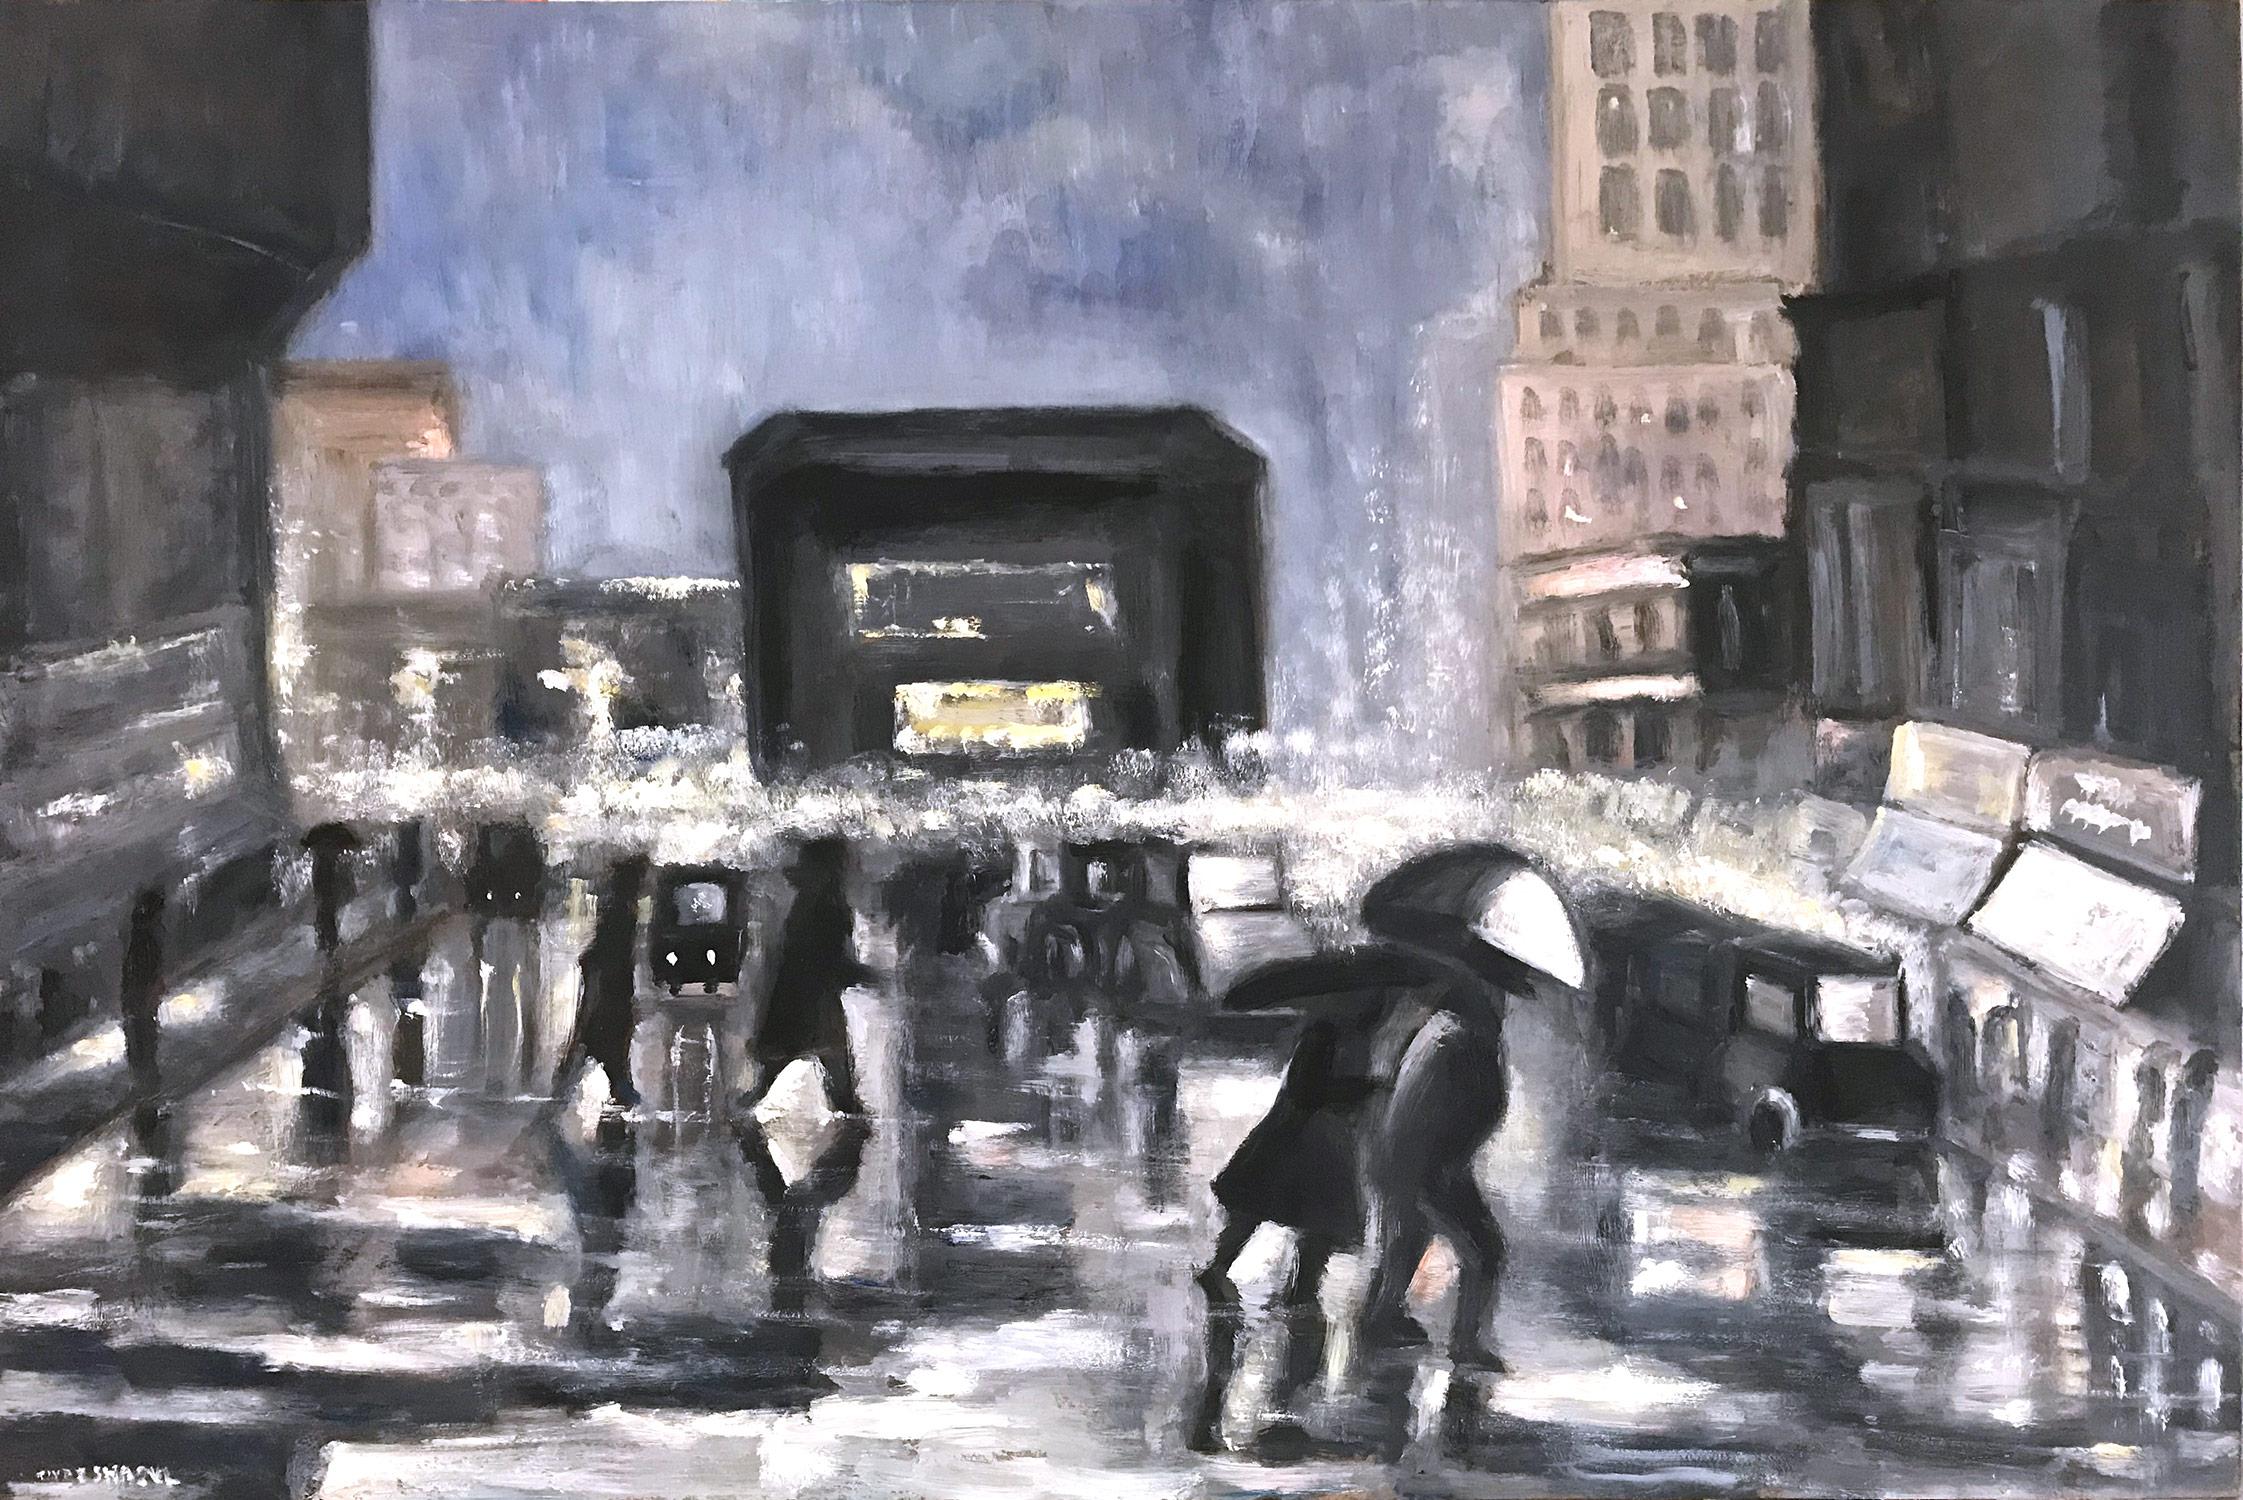 Cindy Shaoul Landscape Painting - "Rain in Downtown New York" Impressionist Ashcan School Style Street Scene